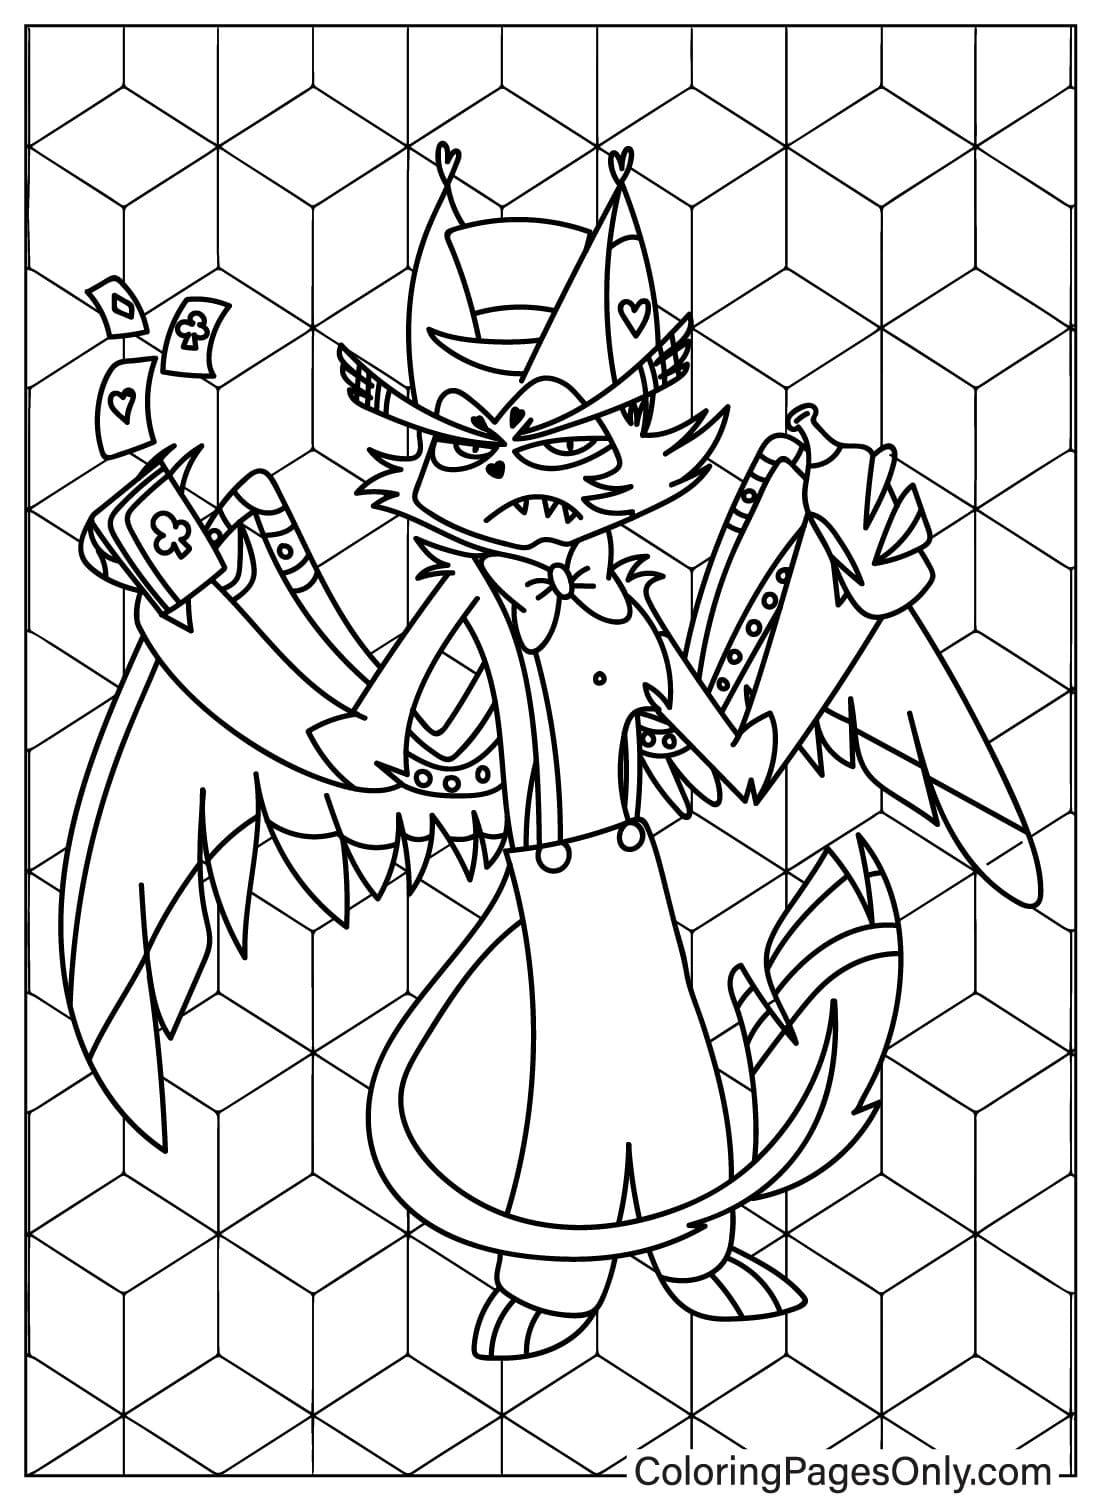 Card God Husk Coloring Page from Husk